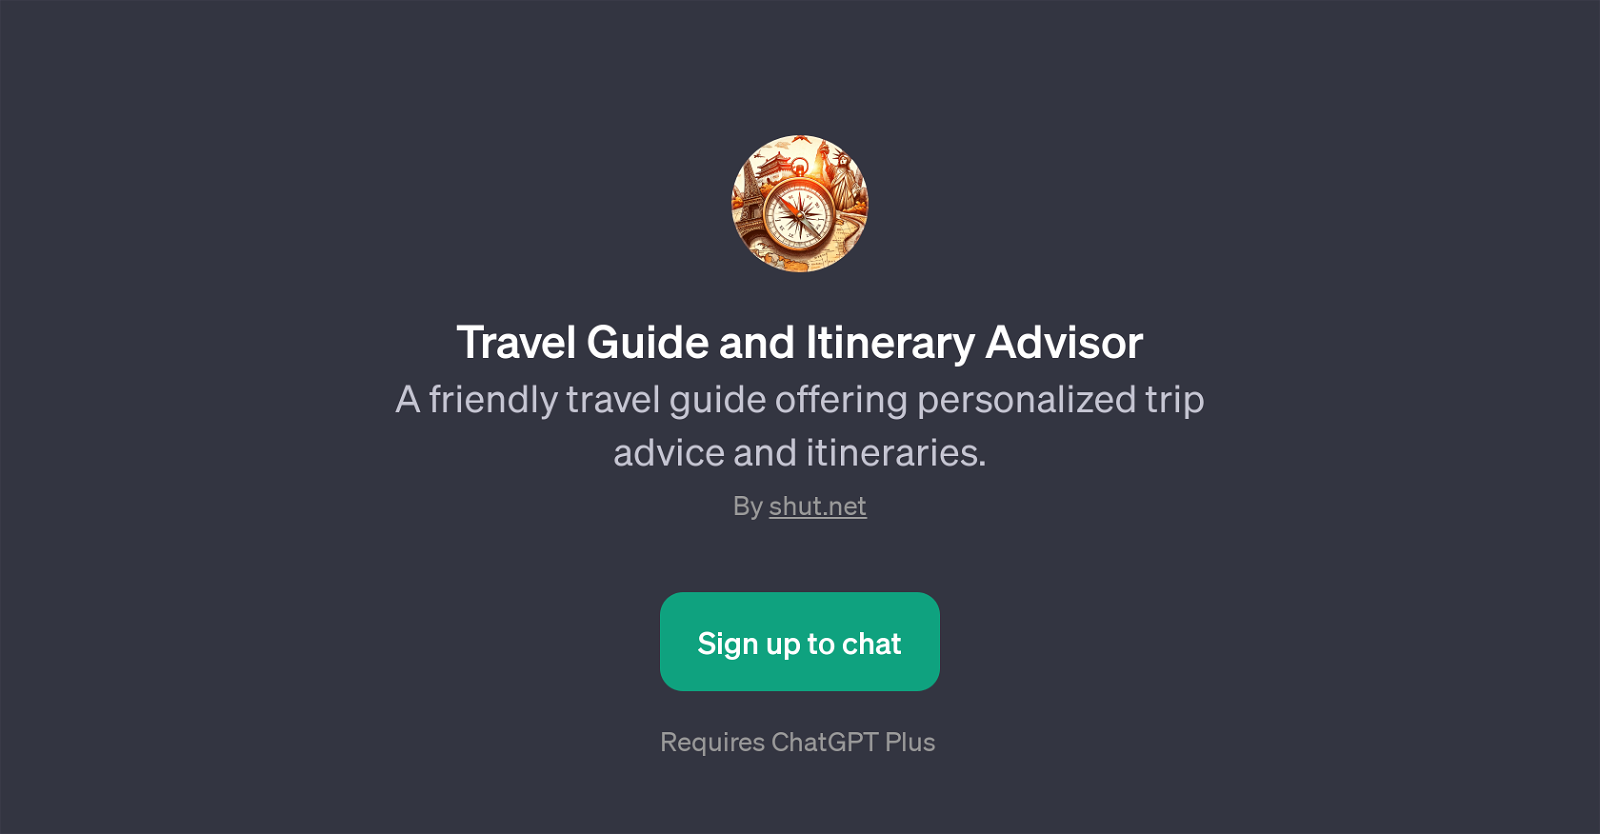 Travel Guide and Itinerary Advisor website